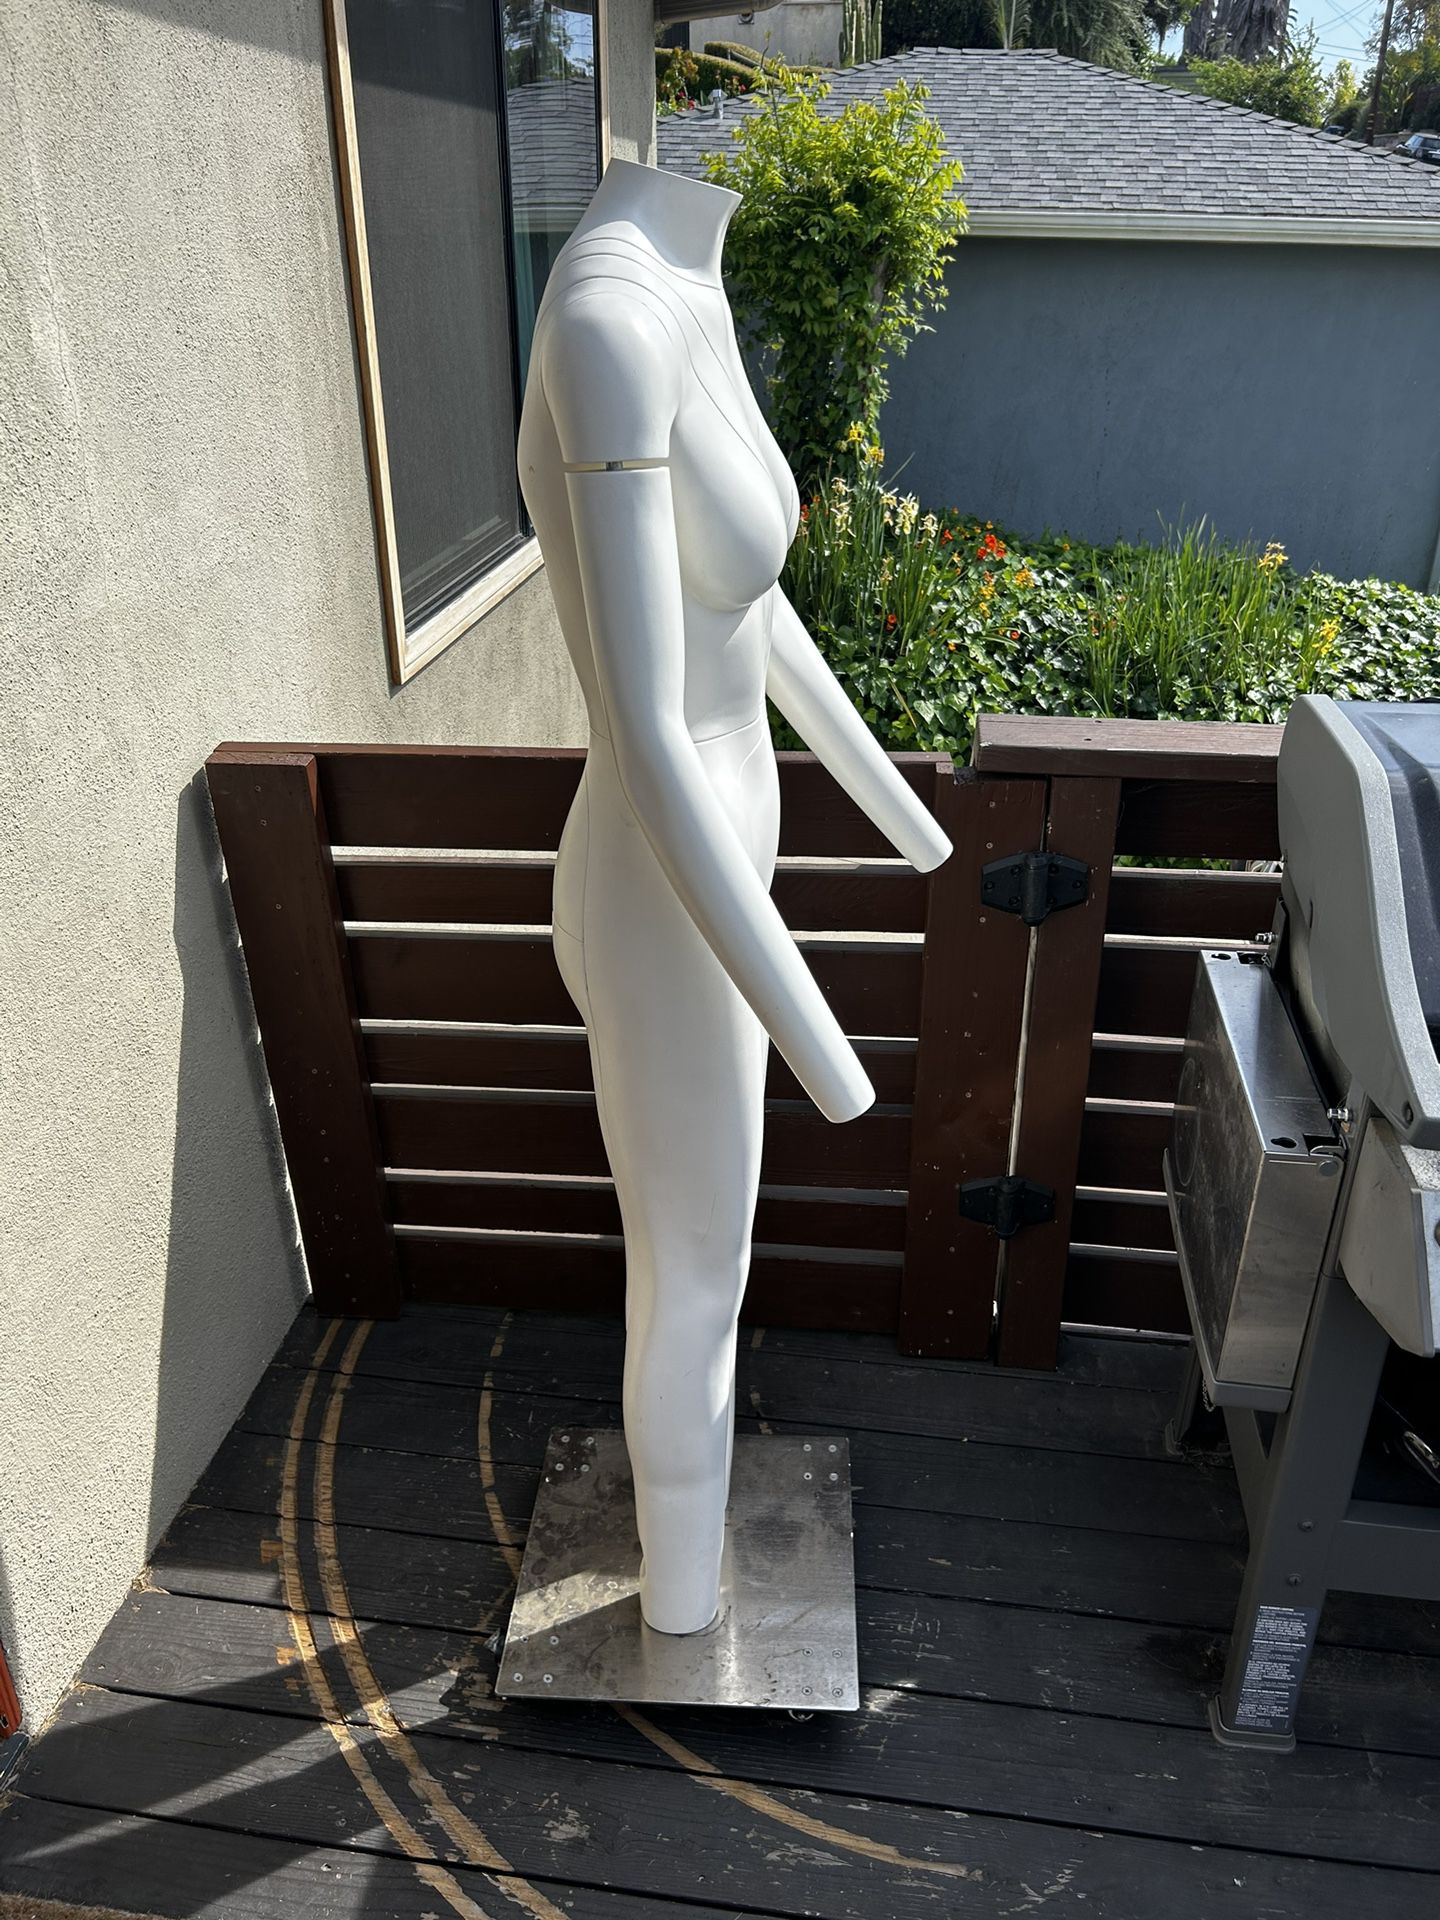 Photography Full Body Mannequin  